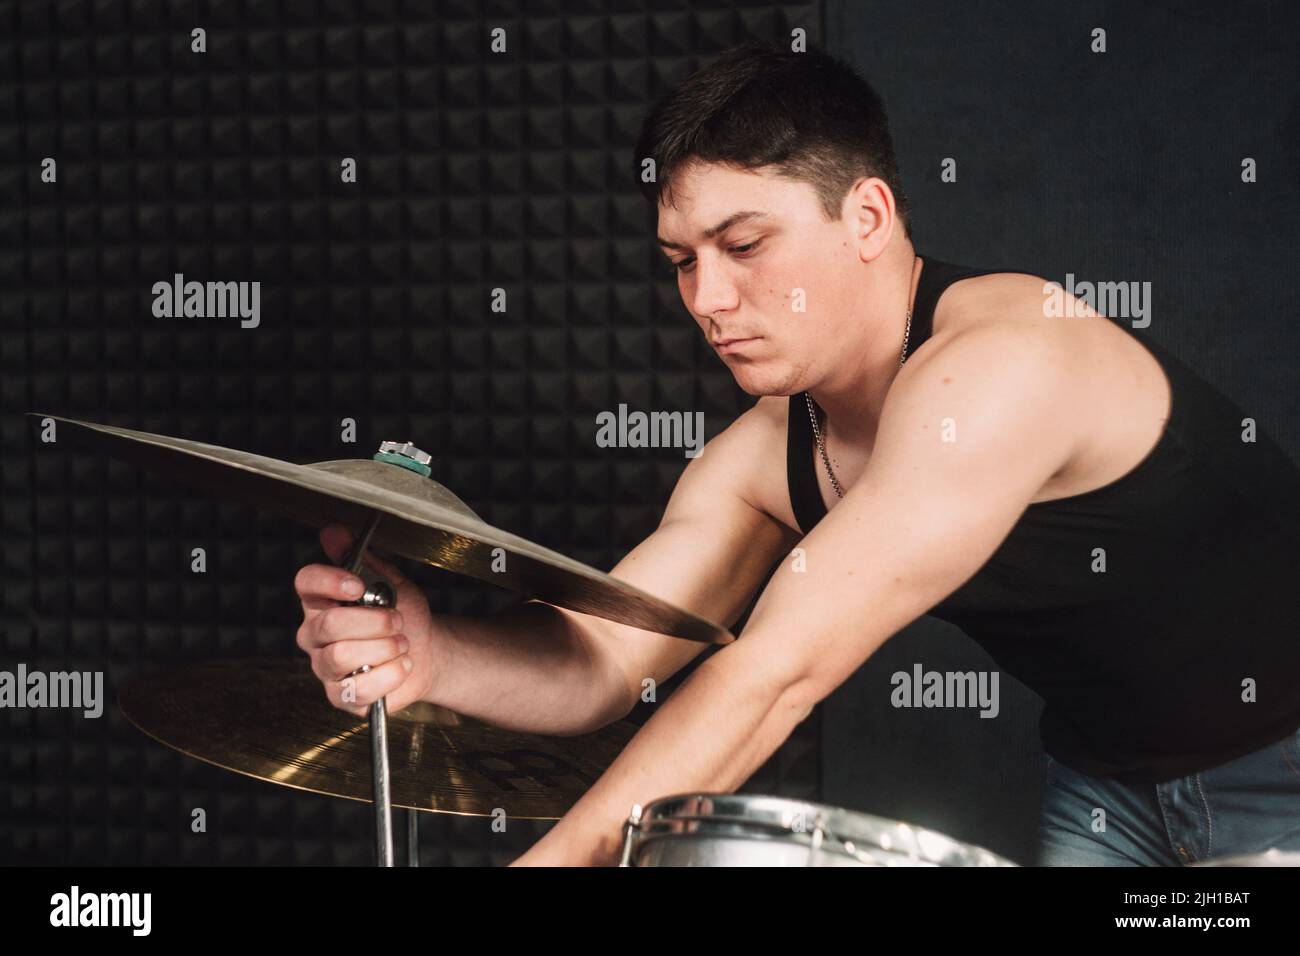 Drum player tuning his drums close-up Stock Photo